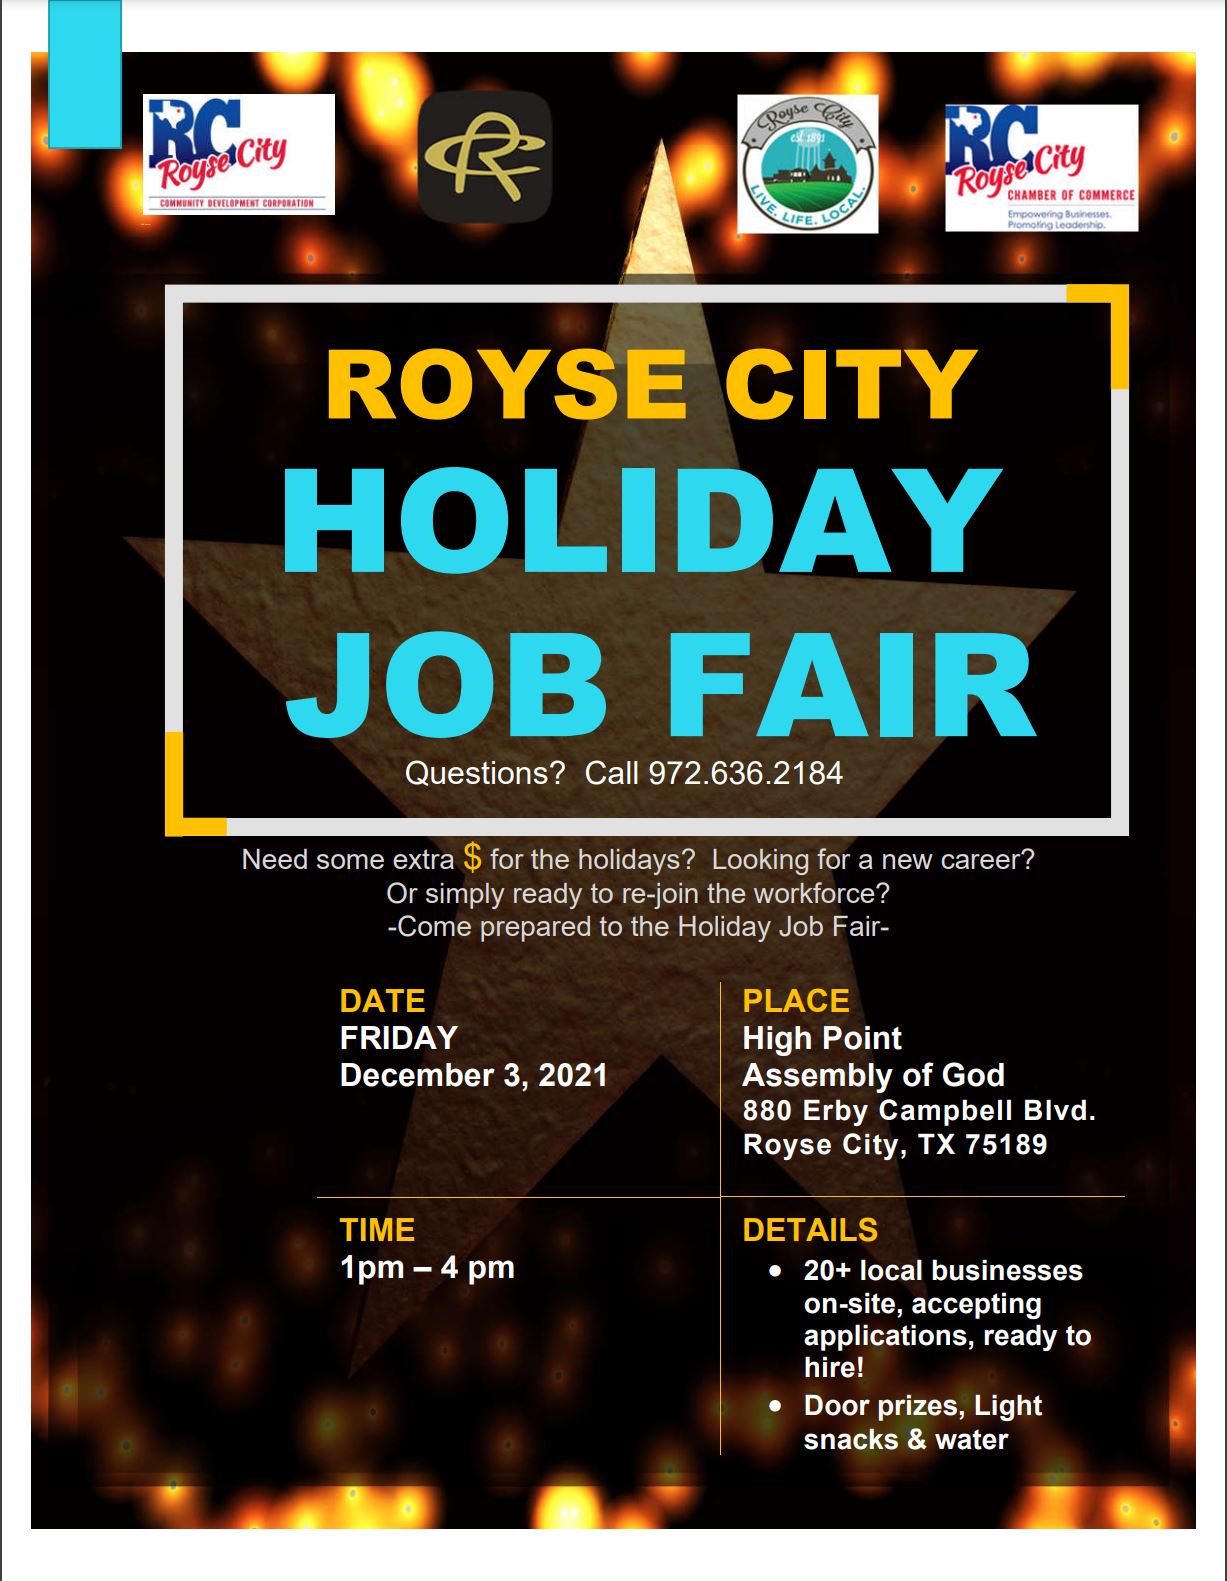 Click the Find Your Perfect Career at the Royse City Holiday Job Fair on December 3rd! Slide Photo to Open